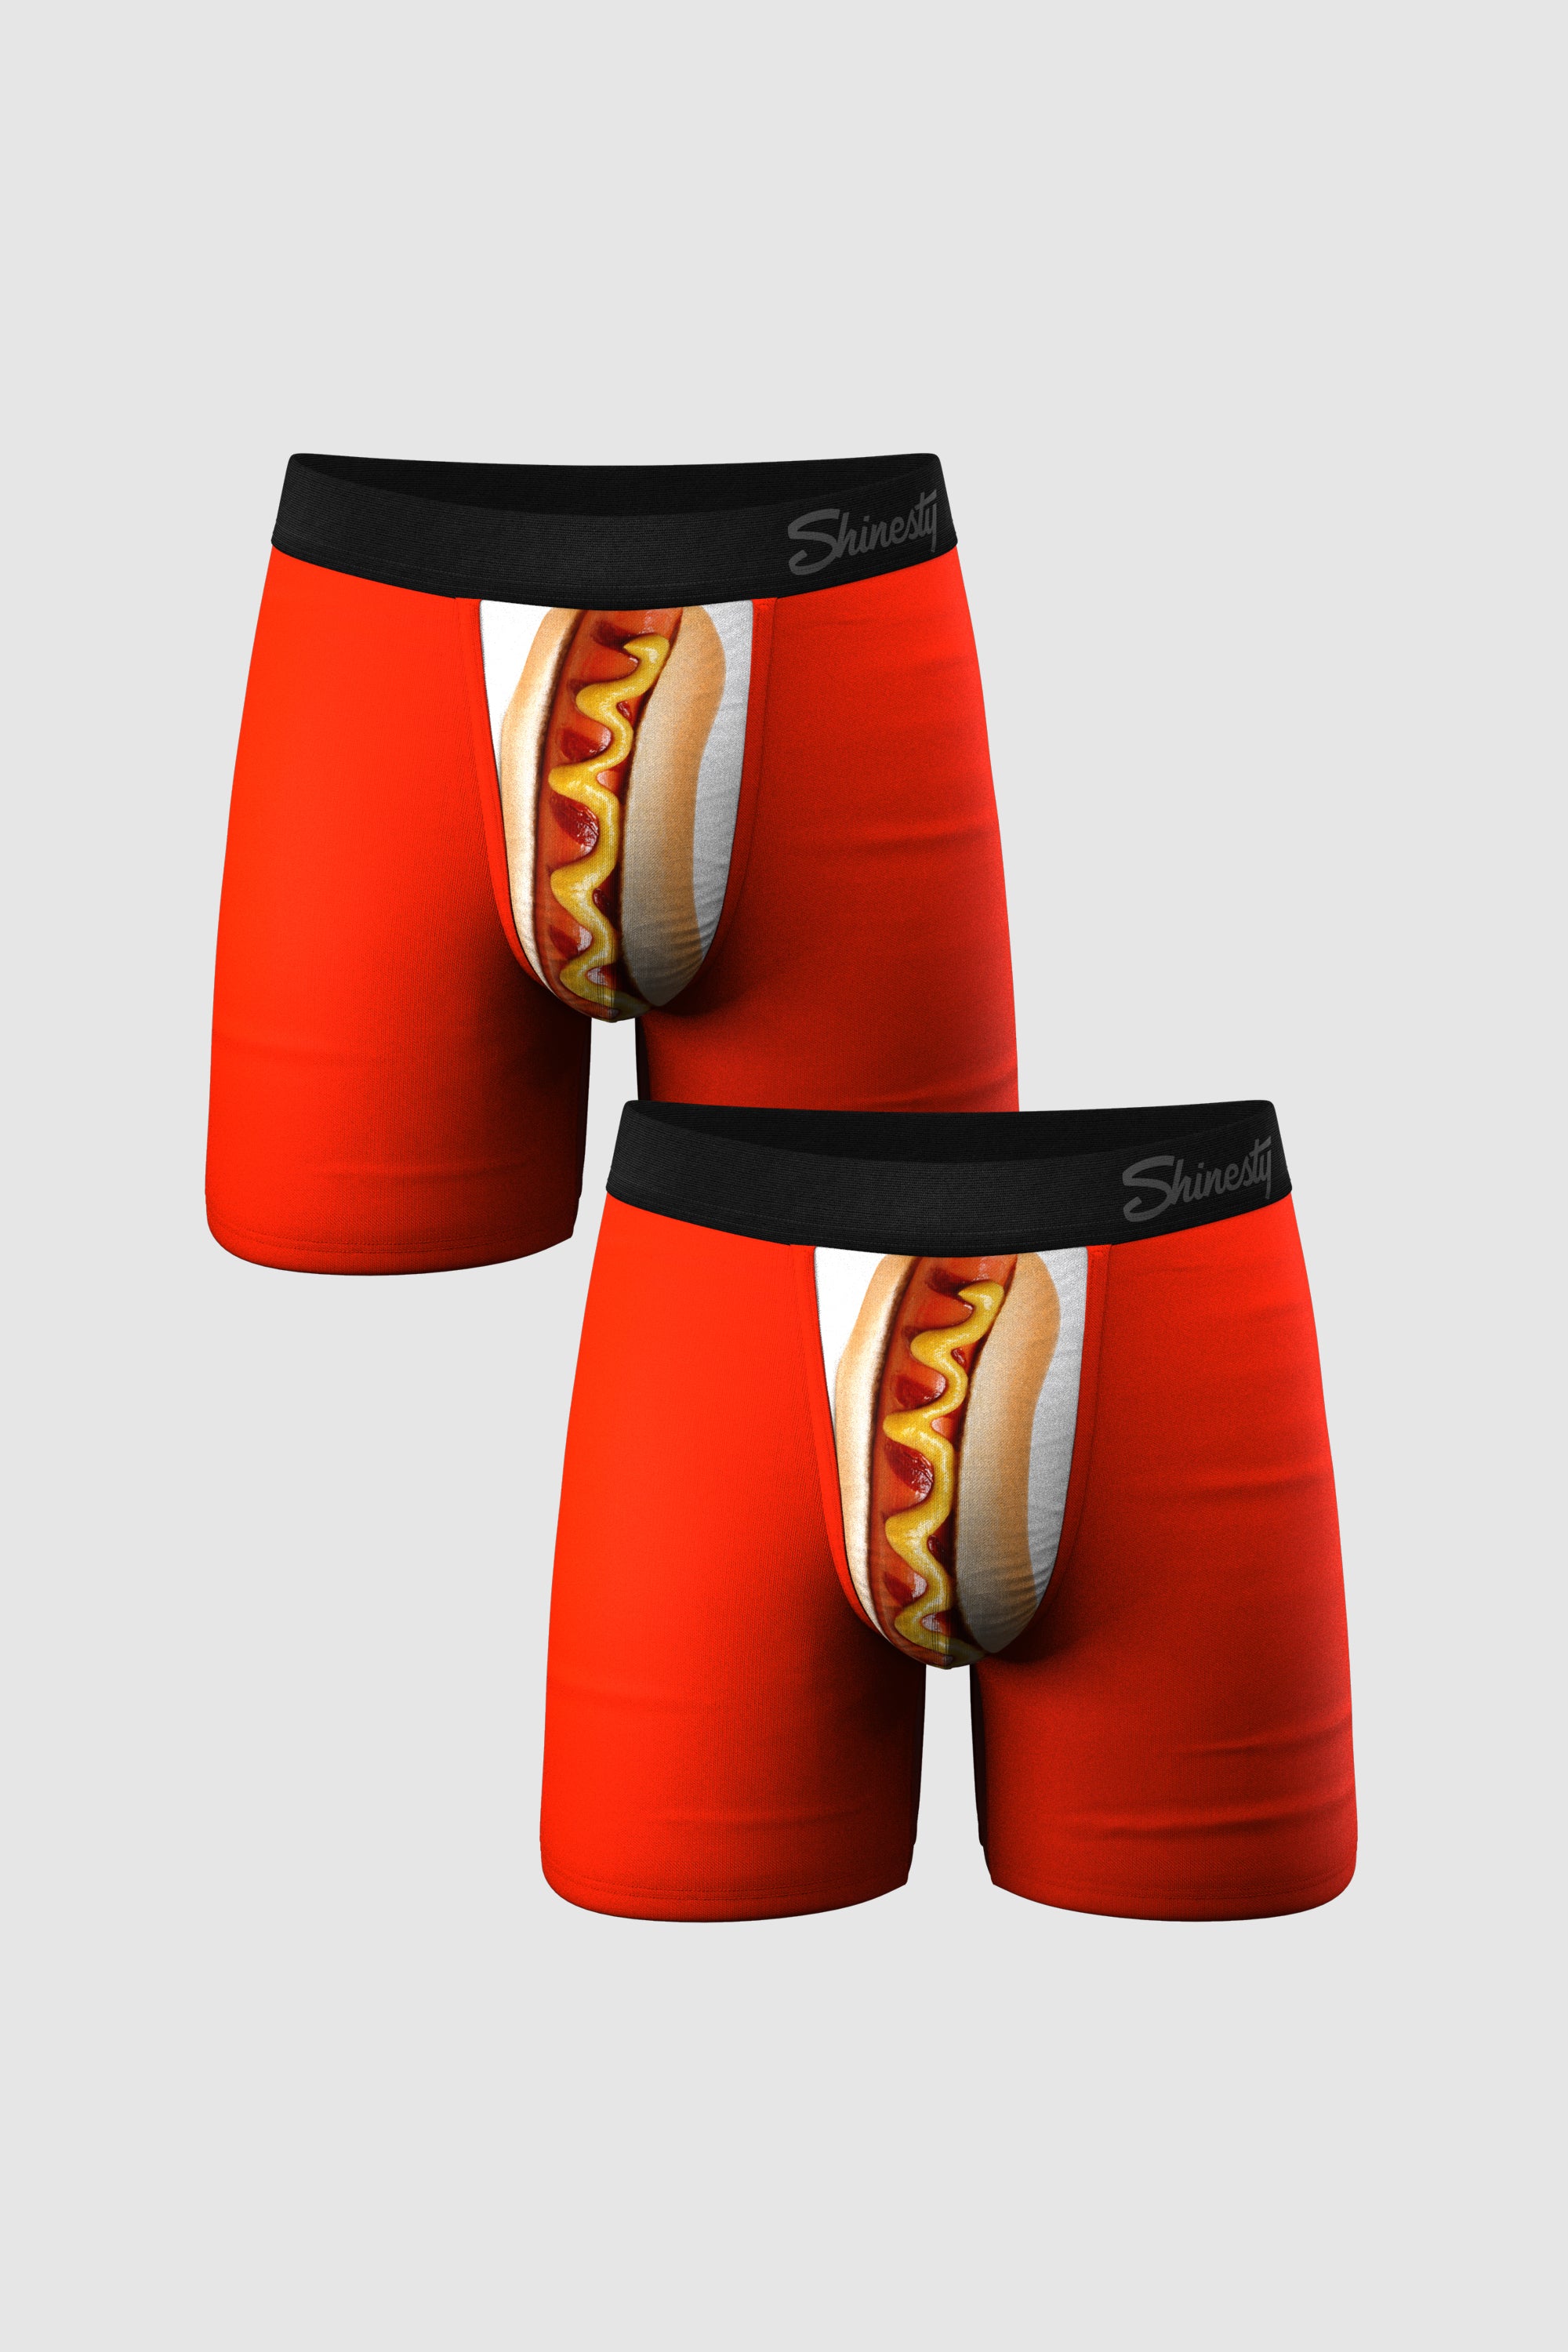 Hot Dog Boxer Couples Matching Underwear 2 Pack